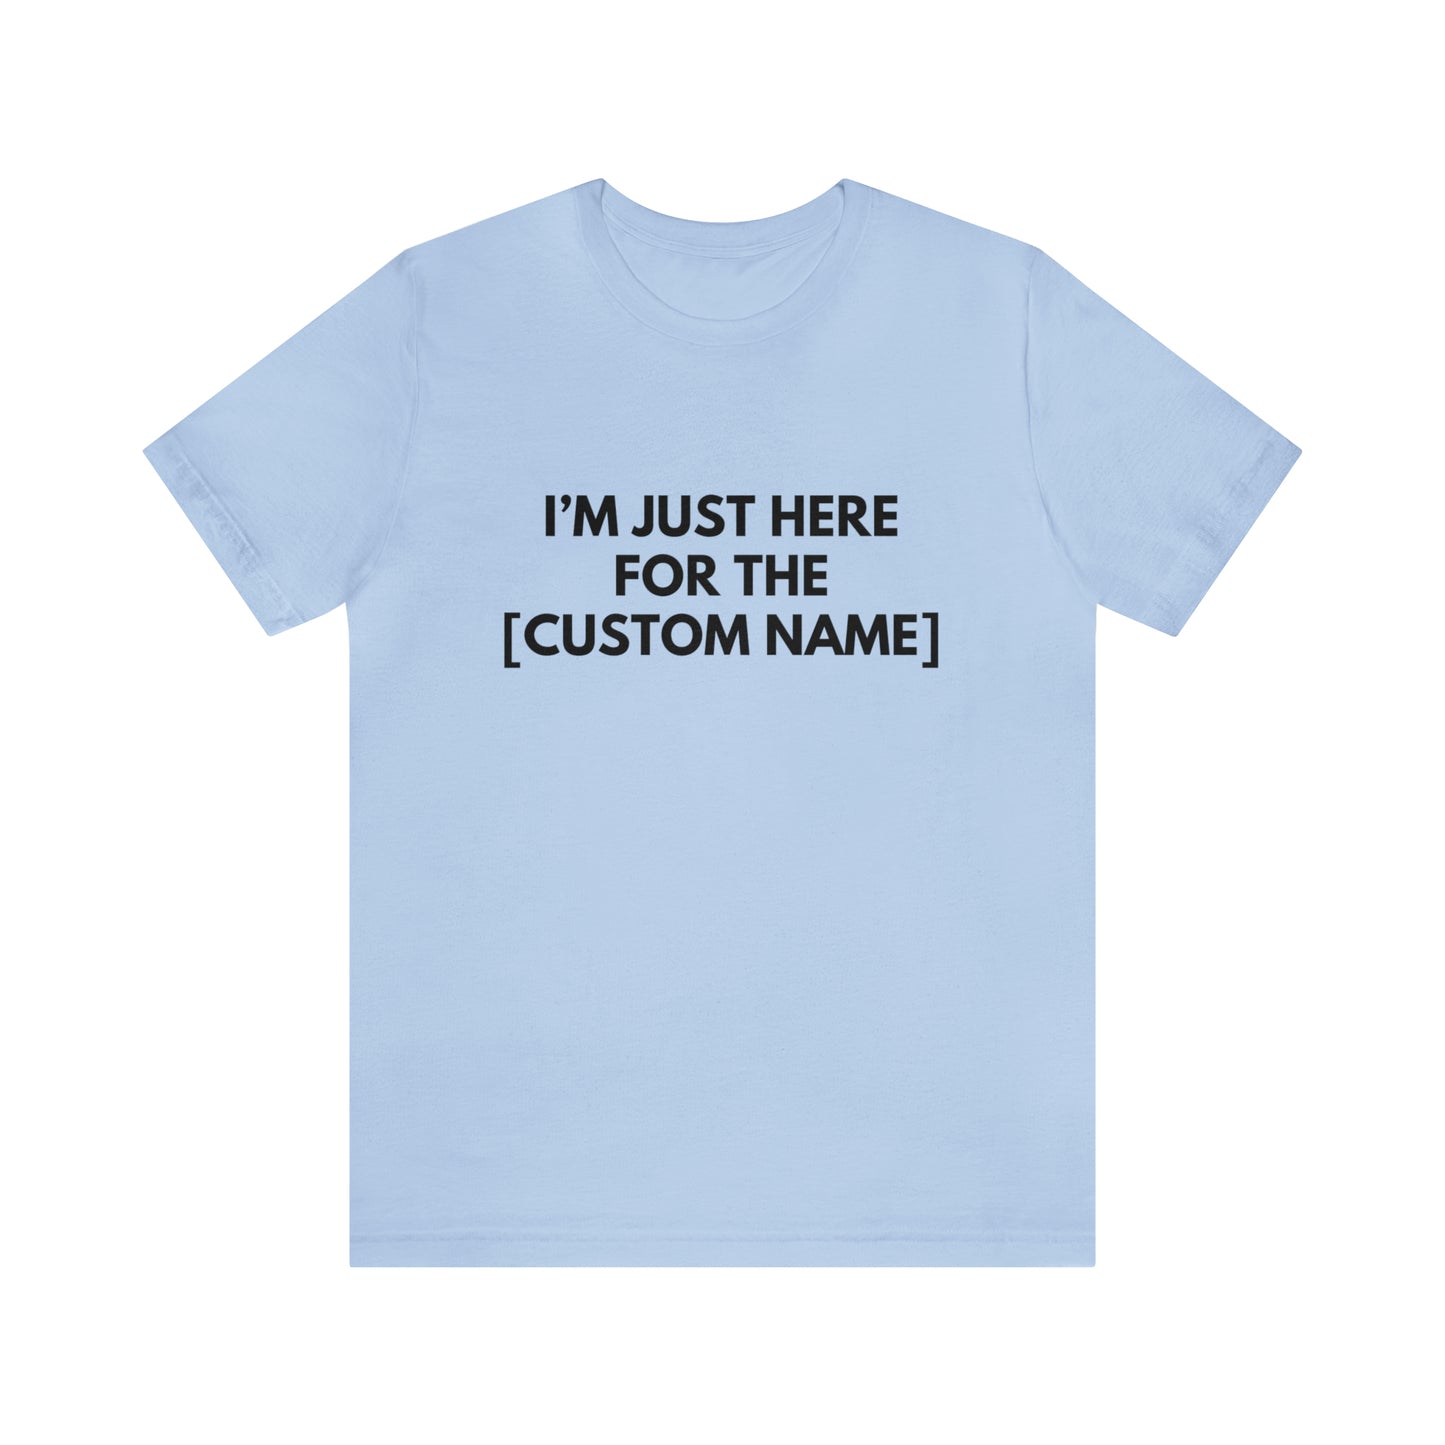 CUSTOM - I'm Just Here For _____ (More colors)